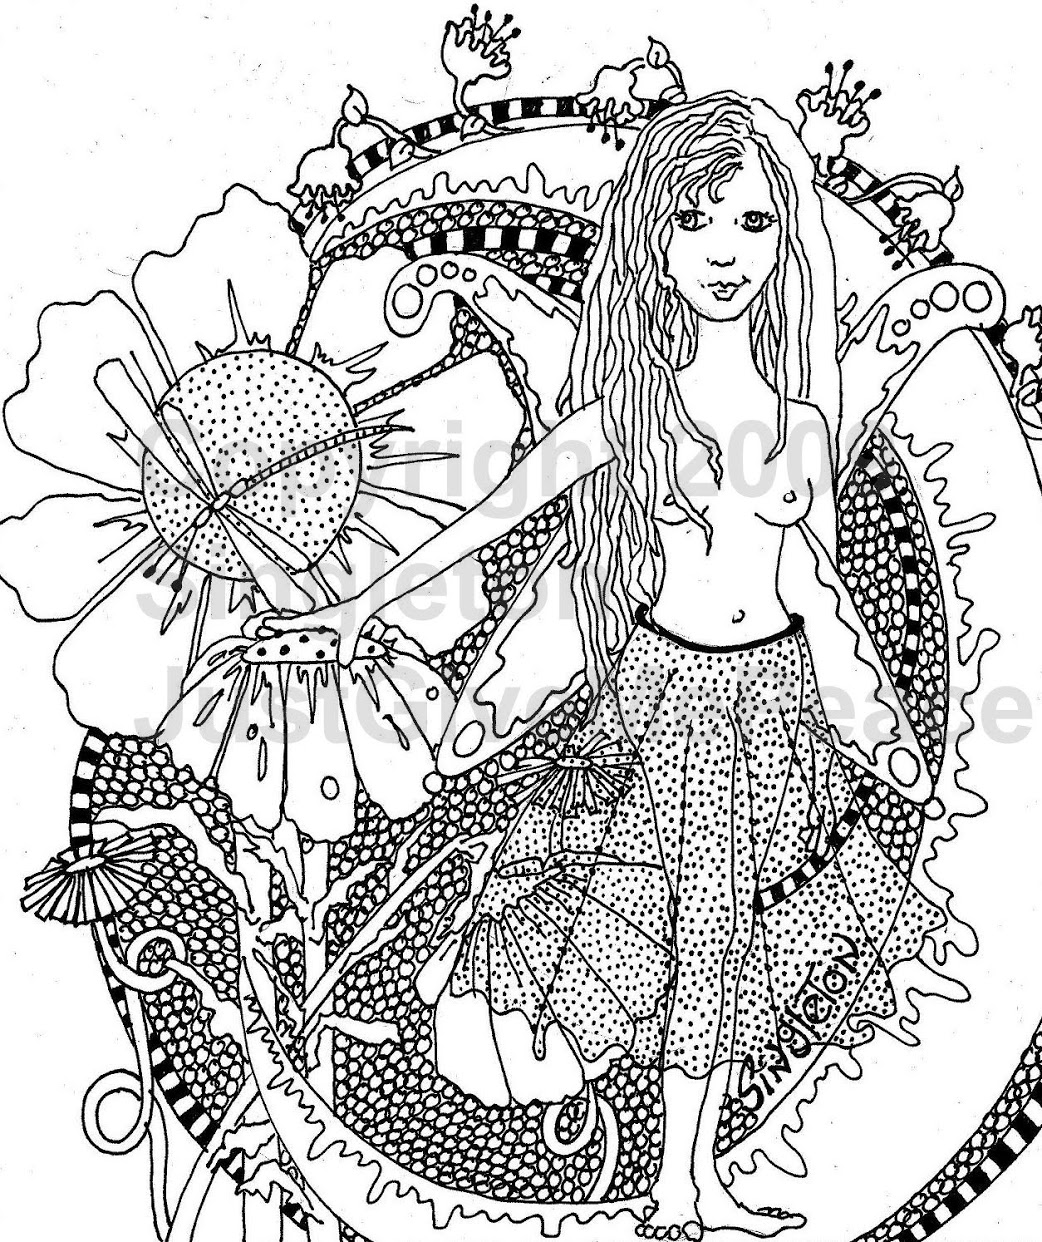 Hippie Coloring Pages At Free Printable Colorings Pages To Print And Color